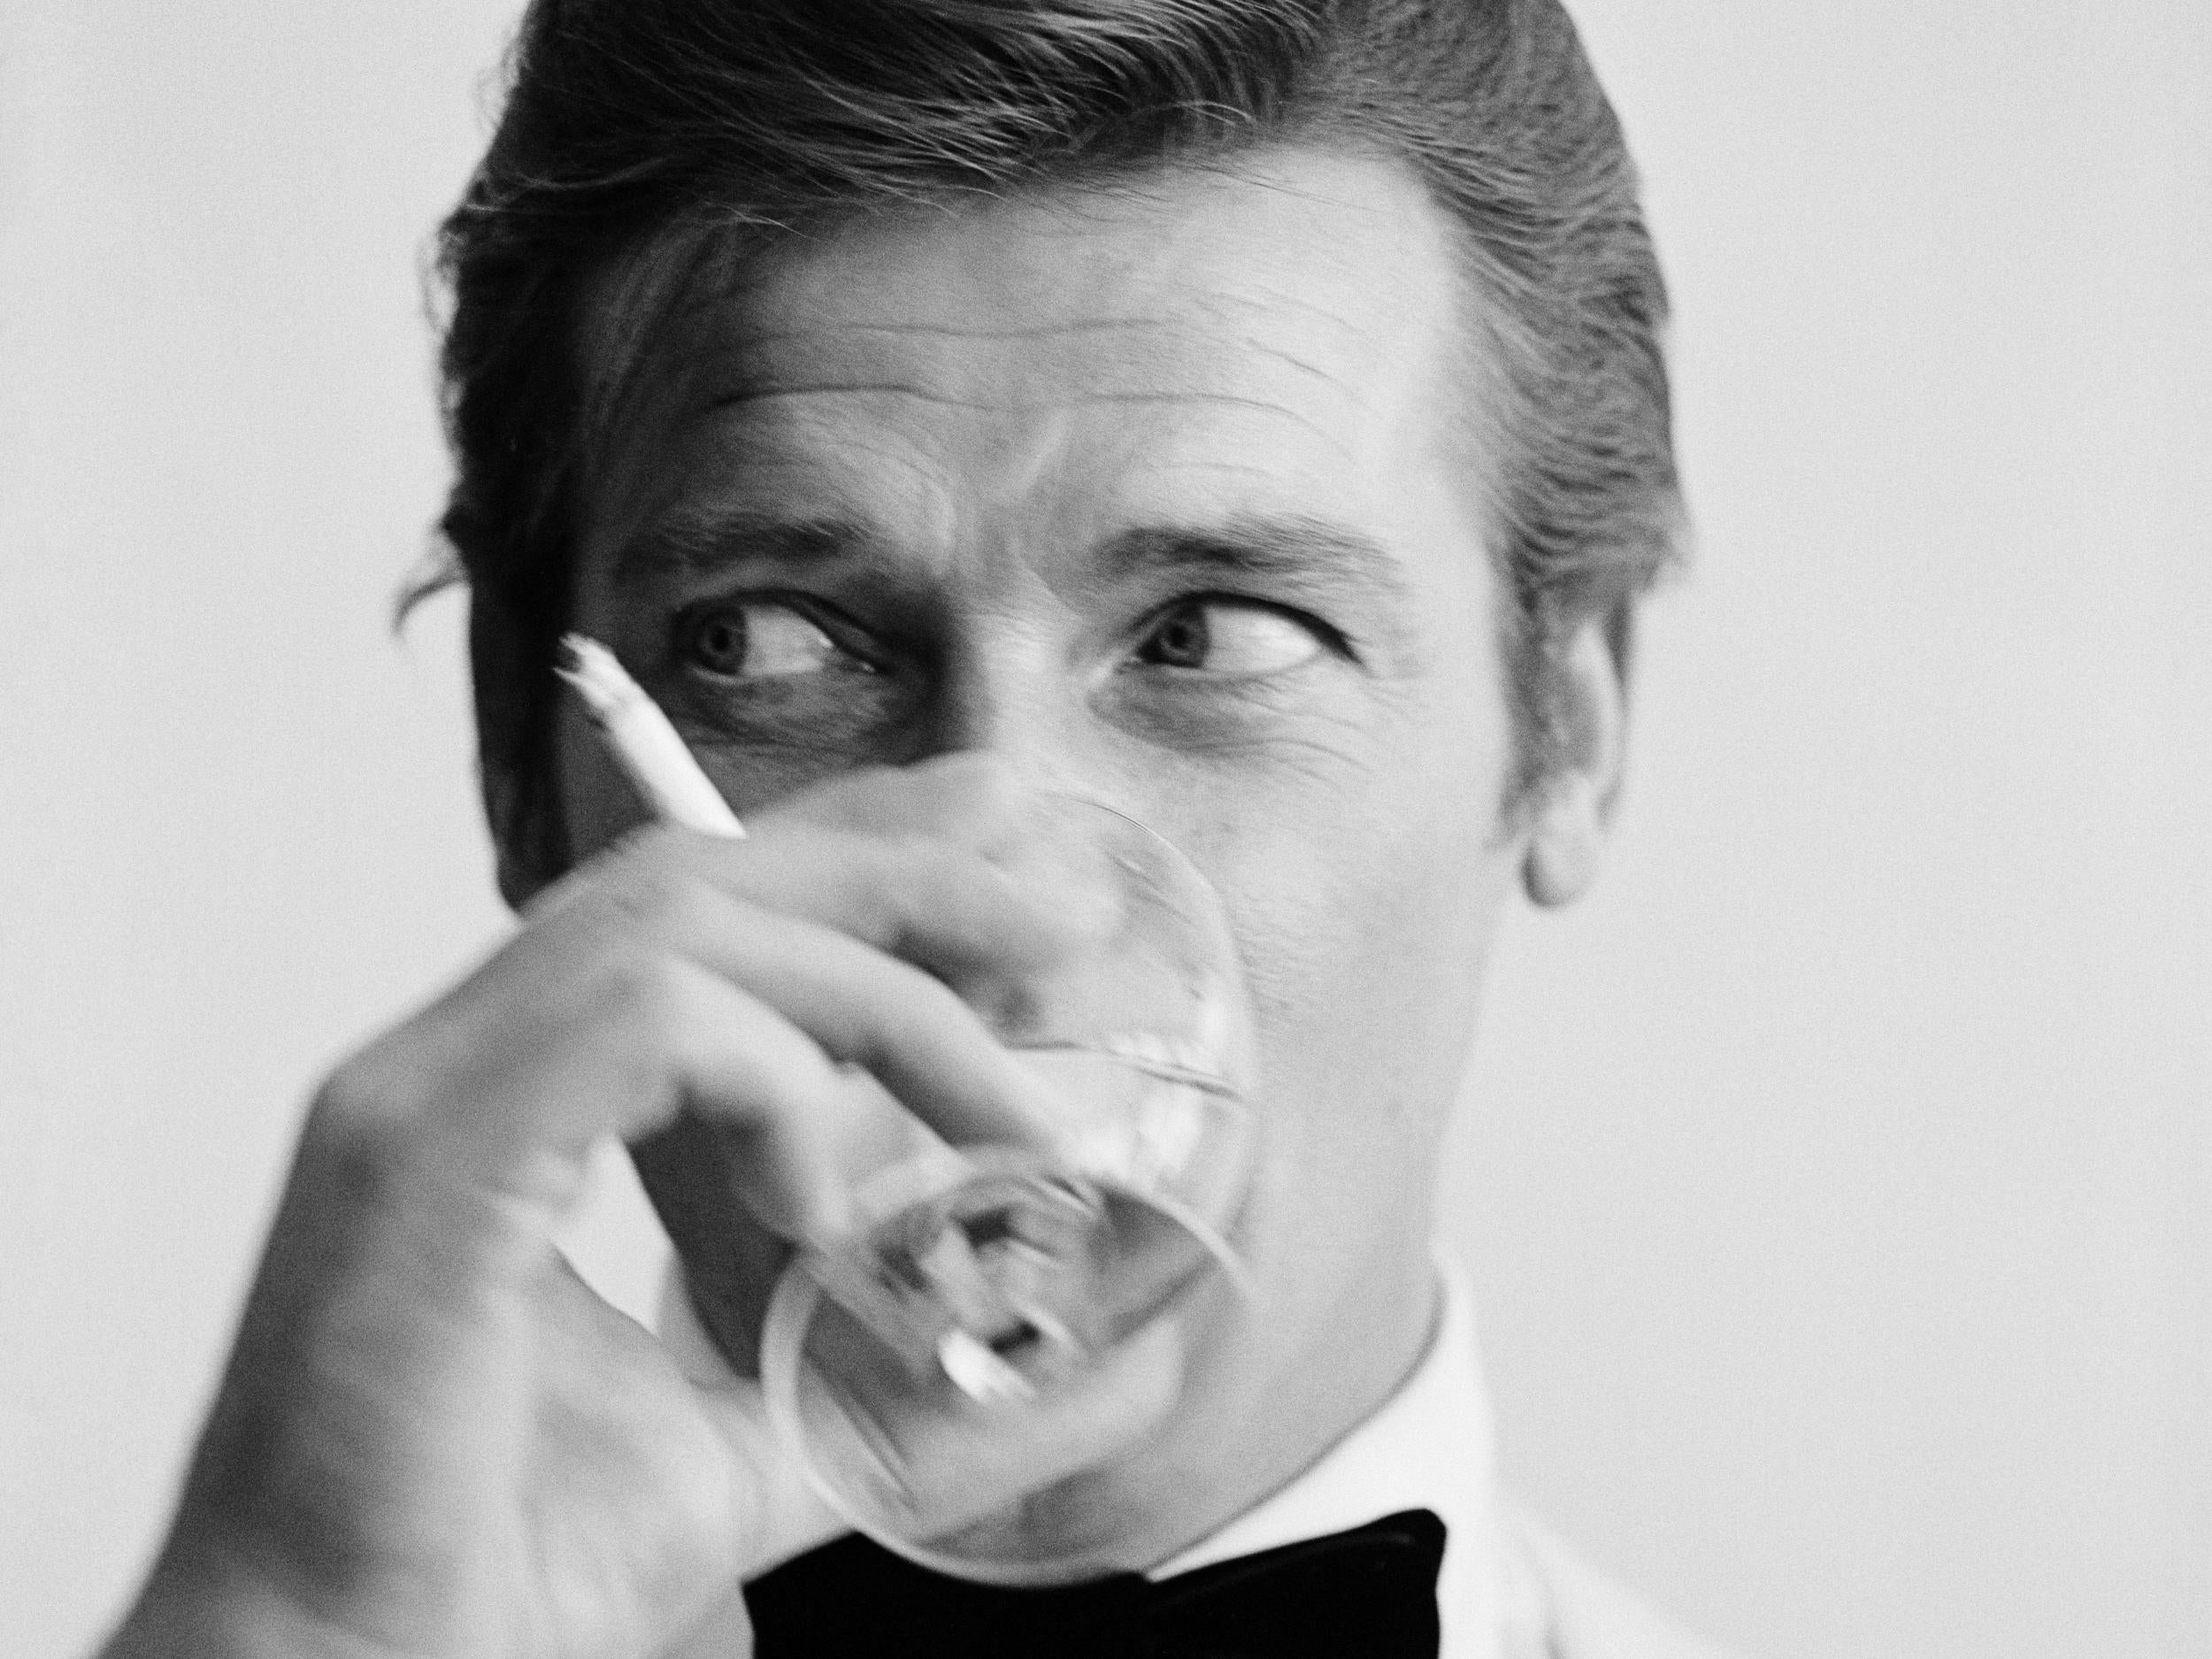 Roger Moore enjoys a cigarette and a martini during a 1968 photoshoot